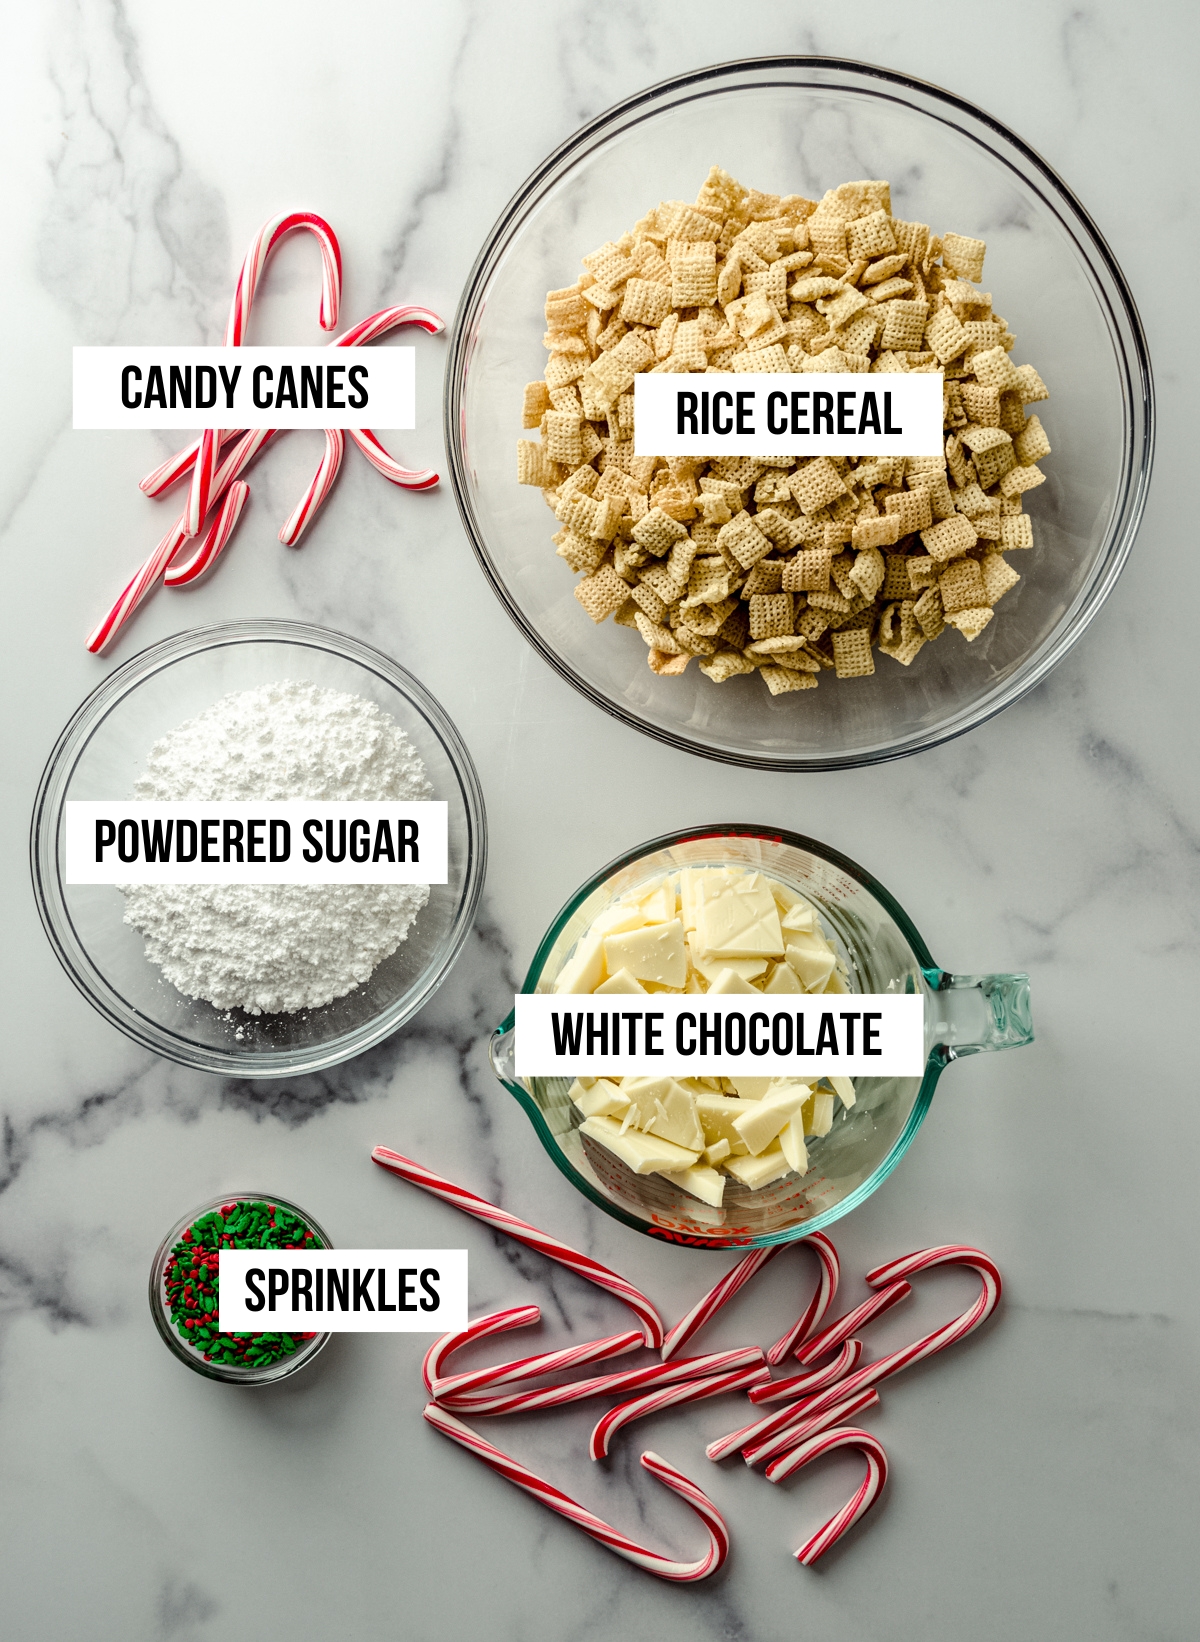 Aerial photo of ingredients for peppermint candy cane puppy chow with text overlay.